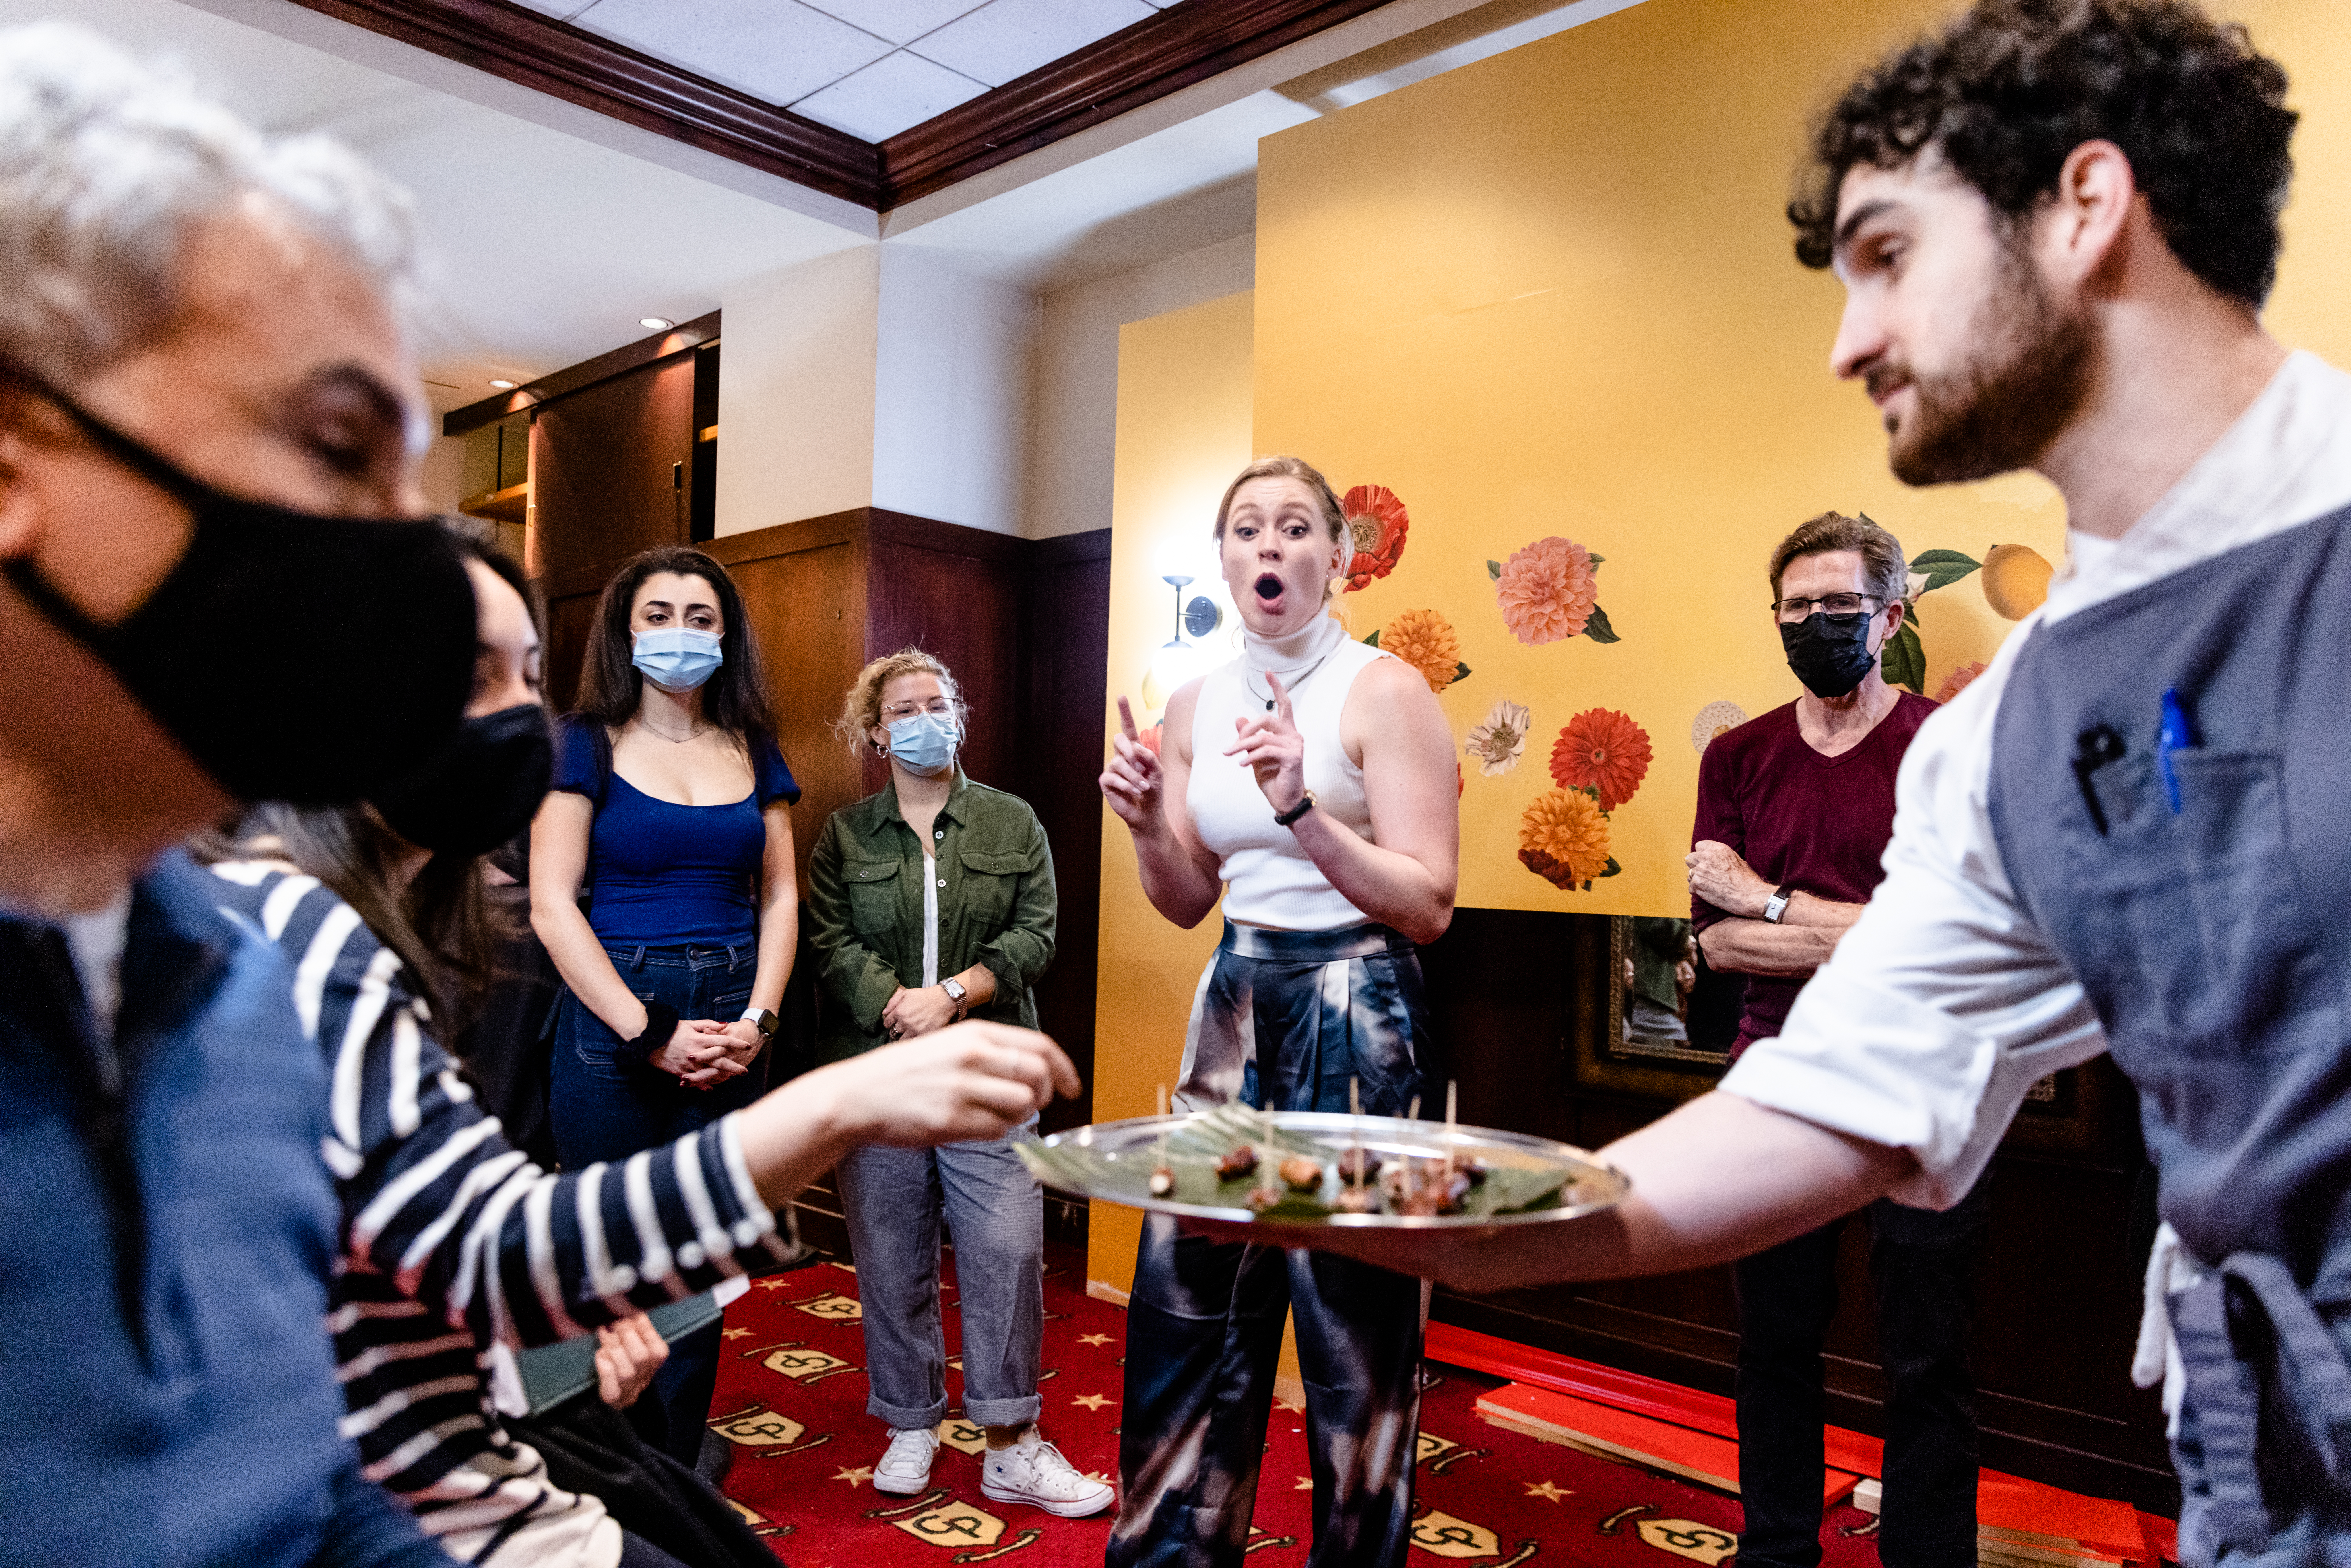 A waiter handing a platter of food to a masked person sitting down while a woman gasps in shock.